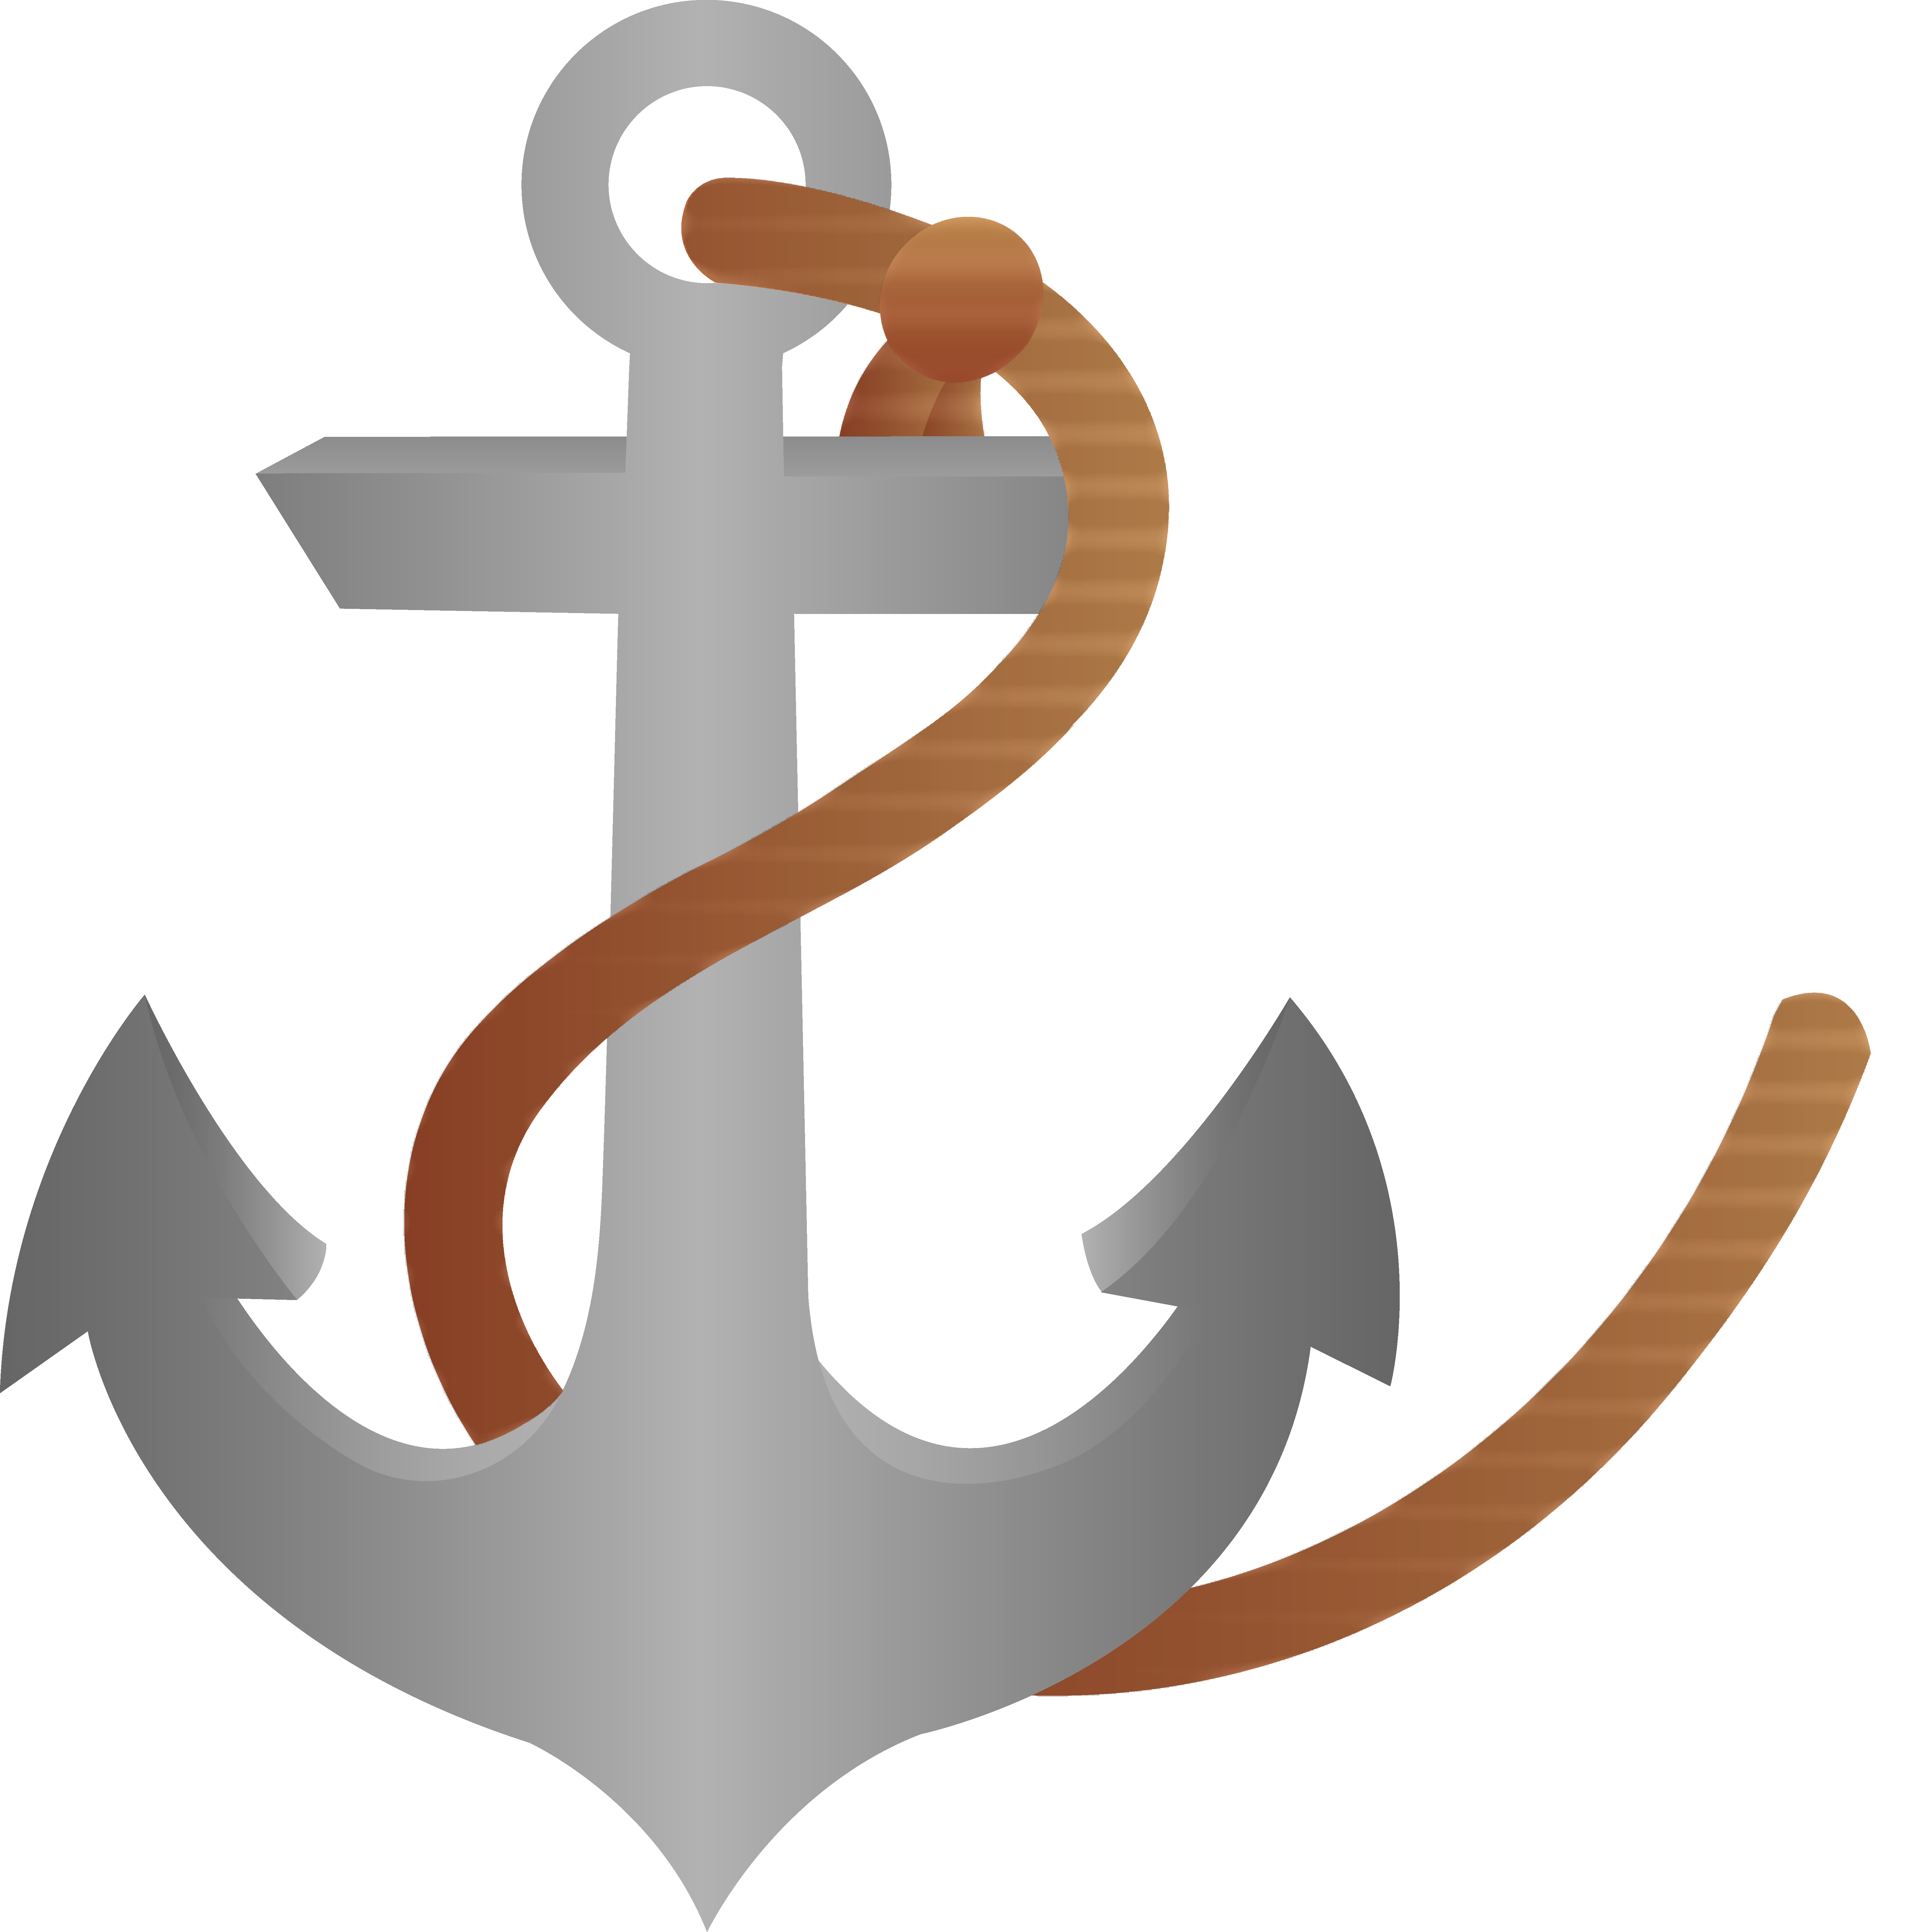 Anchor with rope free. Compass clipart ship